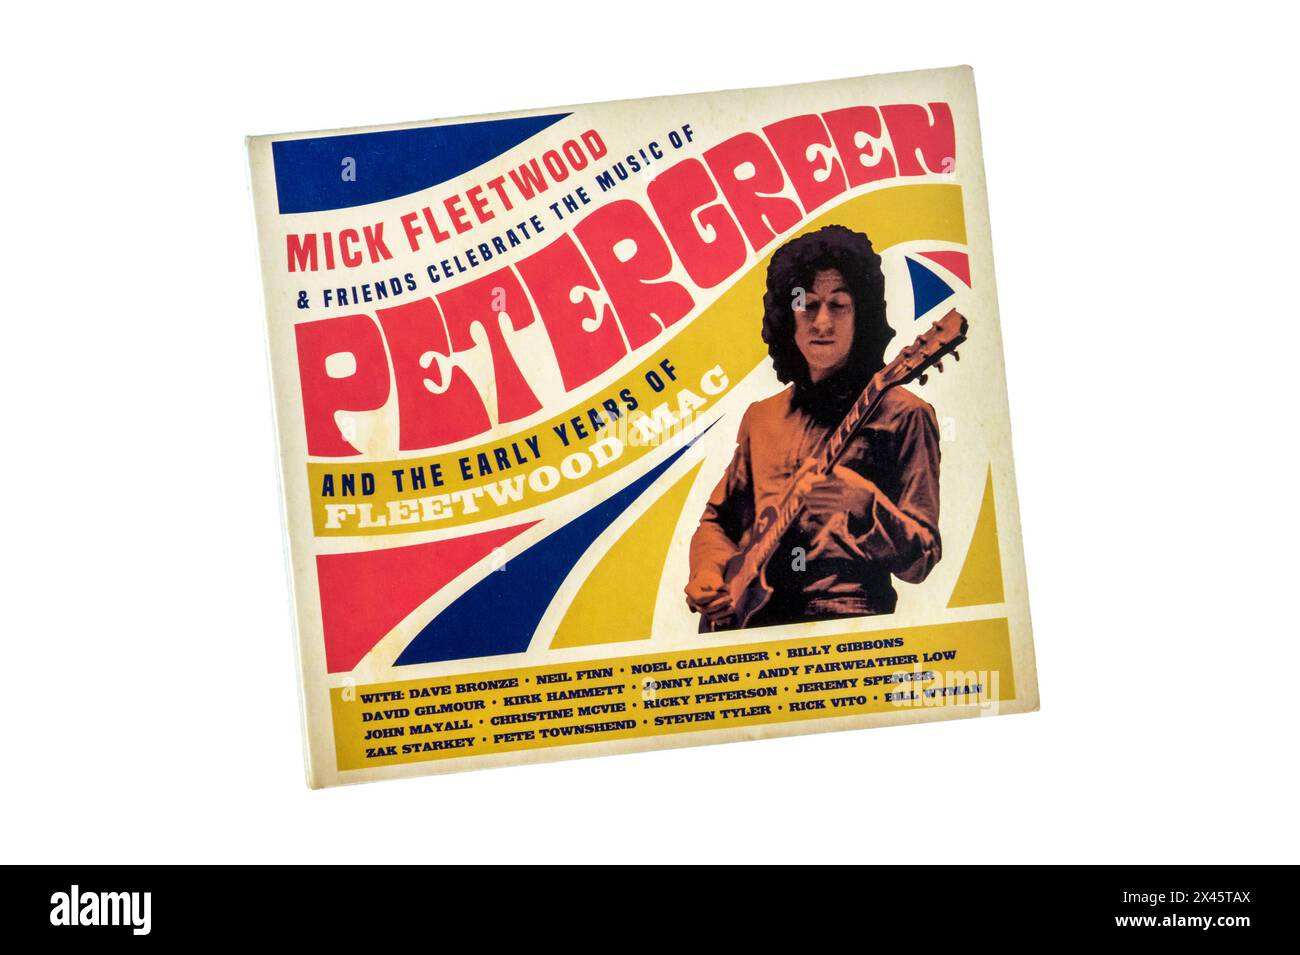 Double CD of Mick Fleetwood & Fiends Celebrate the Music of Peter Green and the Early Years of Fleetwood Mac. Live at London Palladium February 2020. Stock Photo